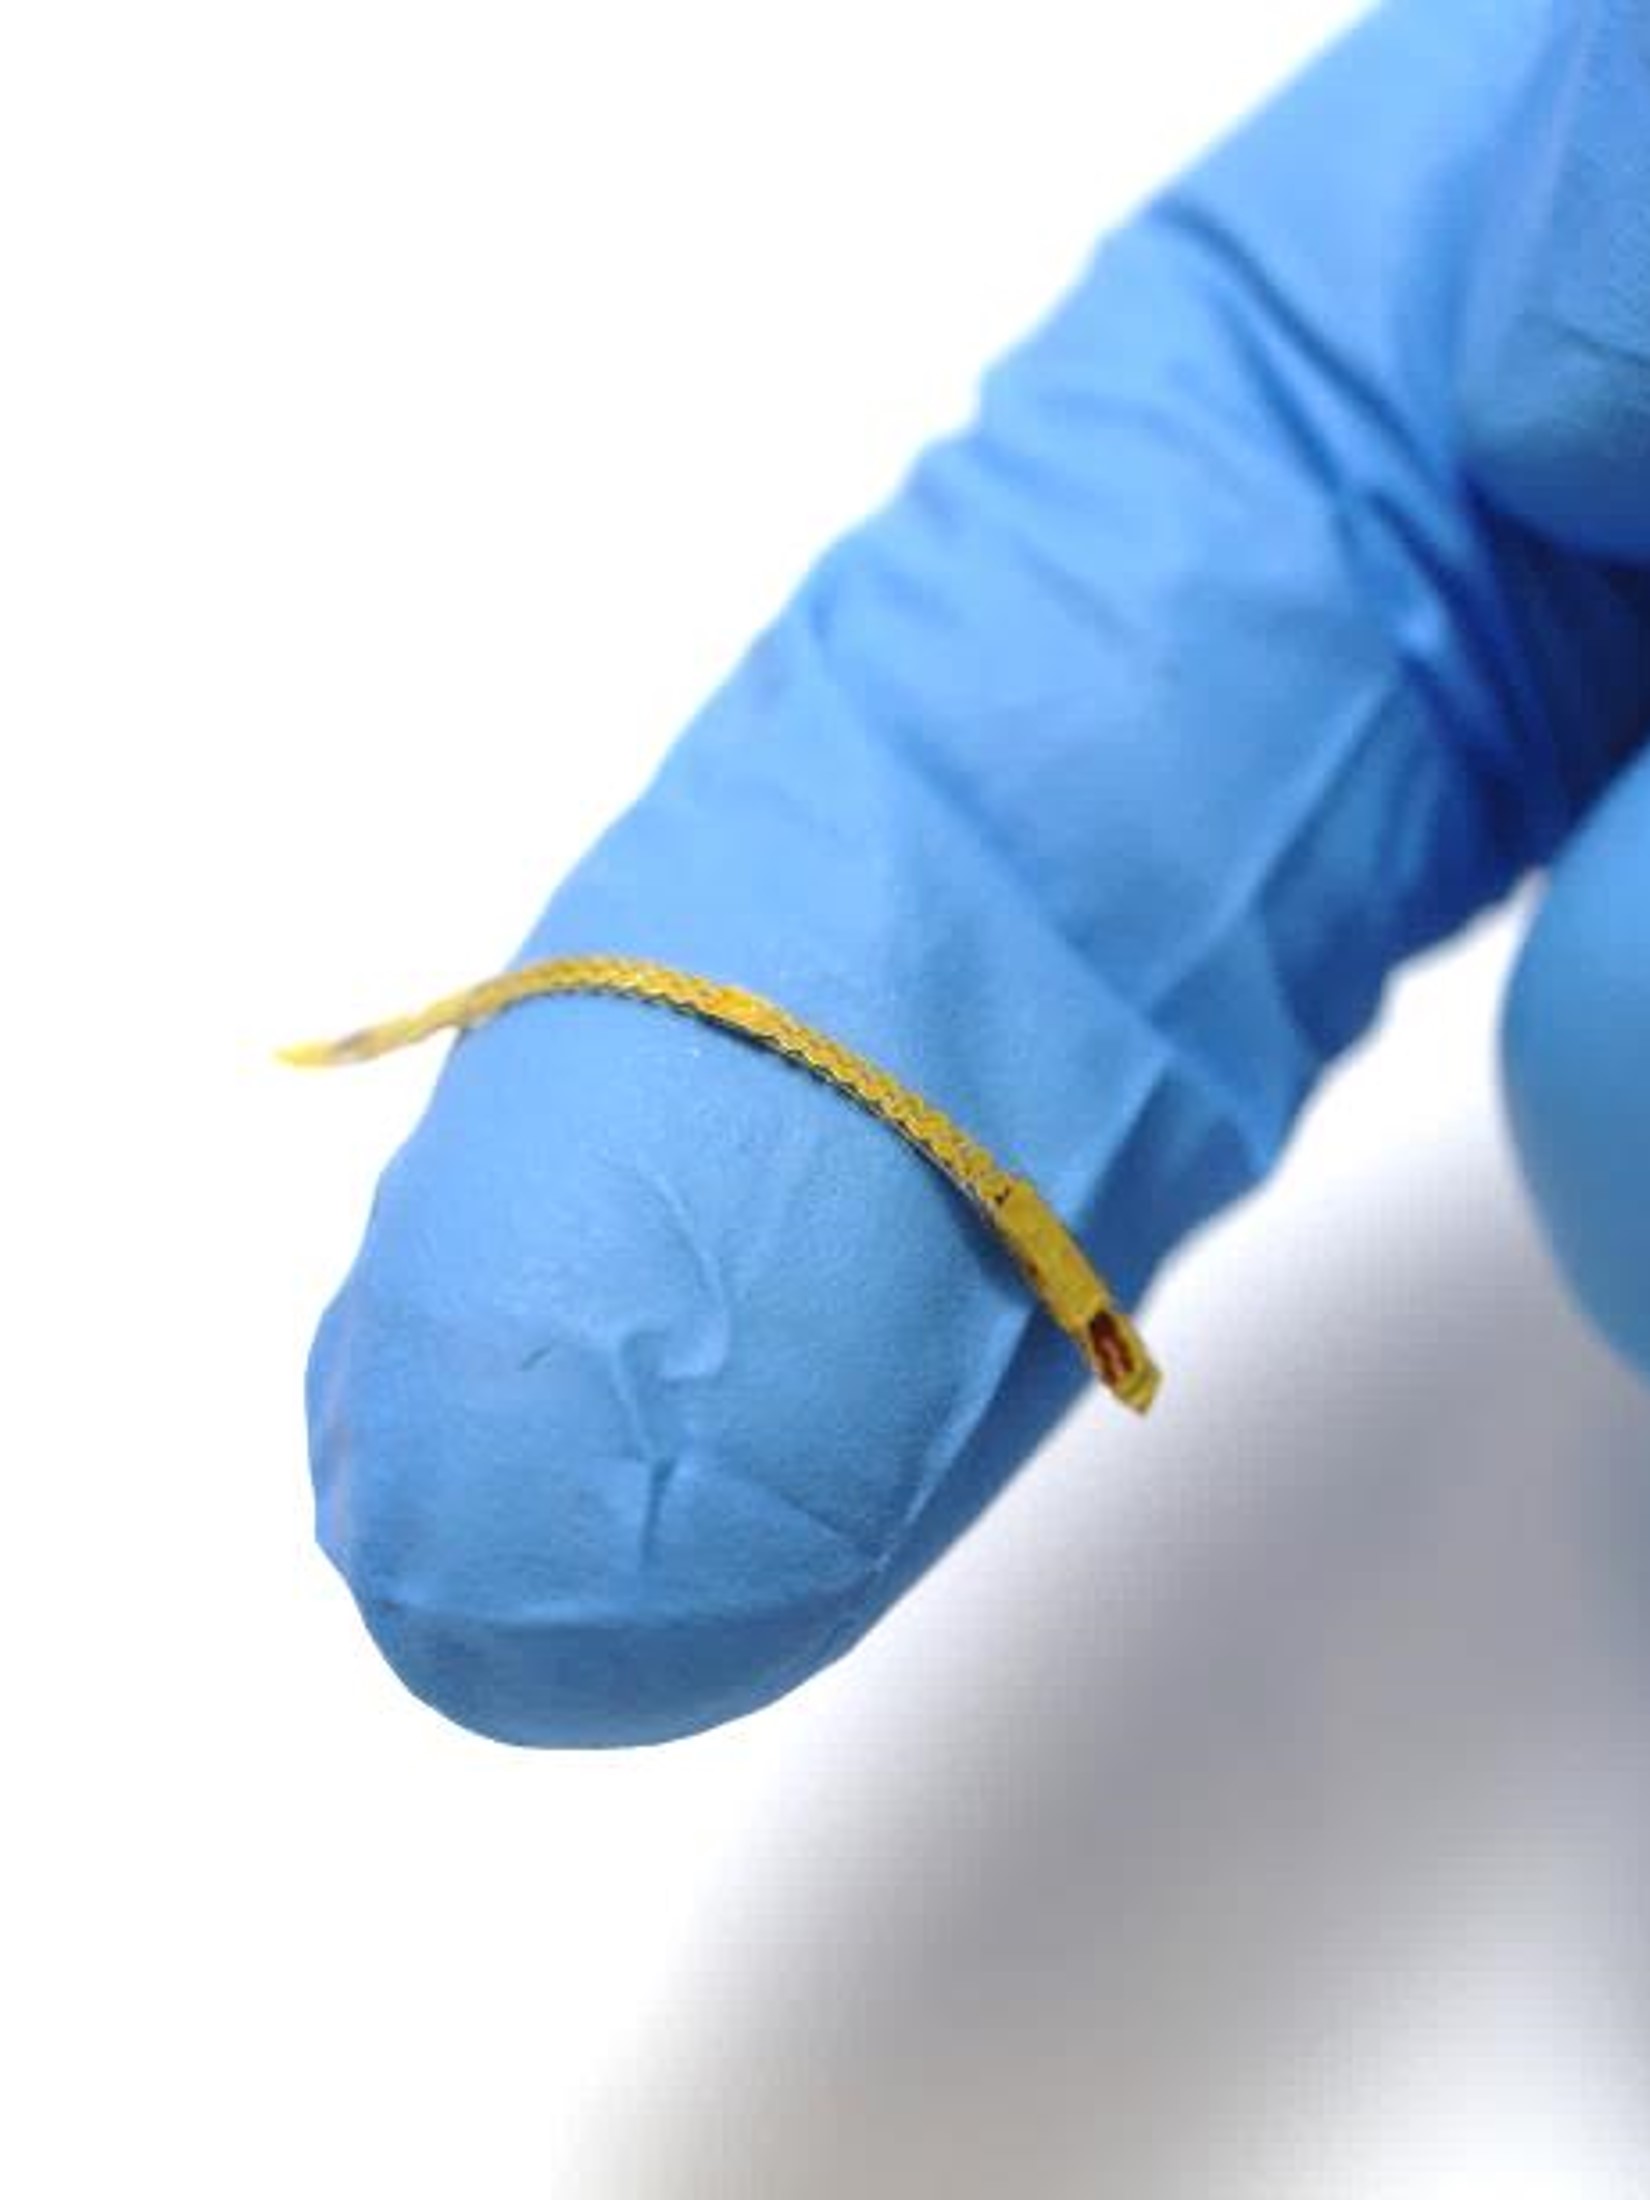 This smart stent can continuously monitor arterial pressure, pulse, and flow.